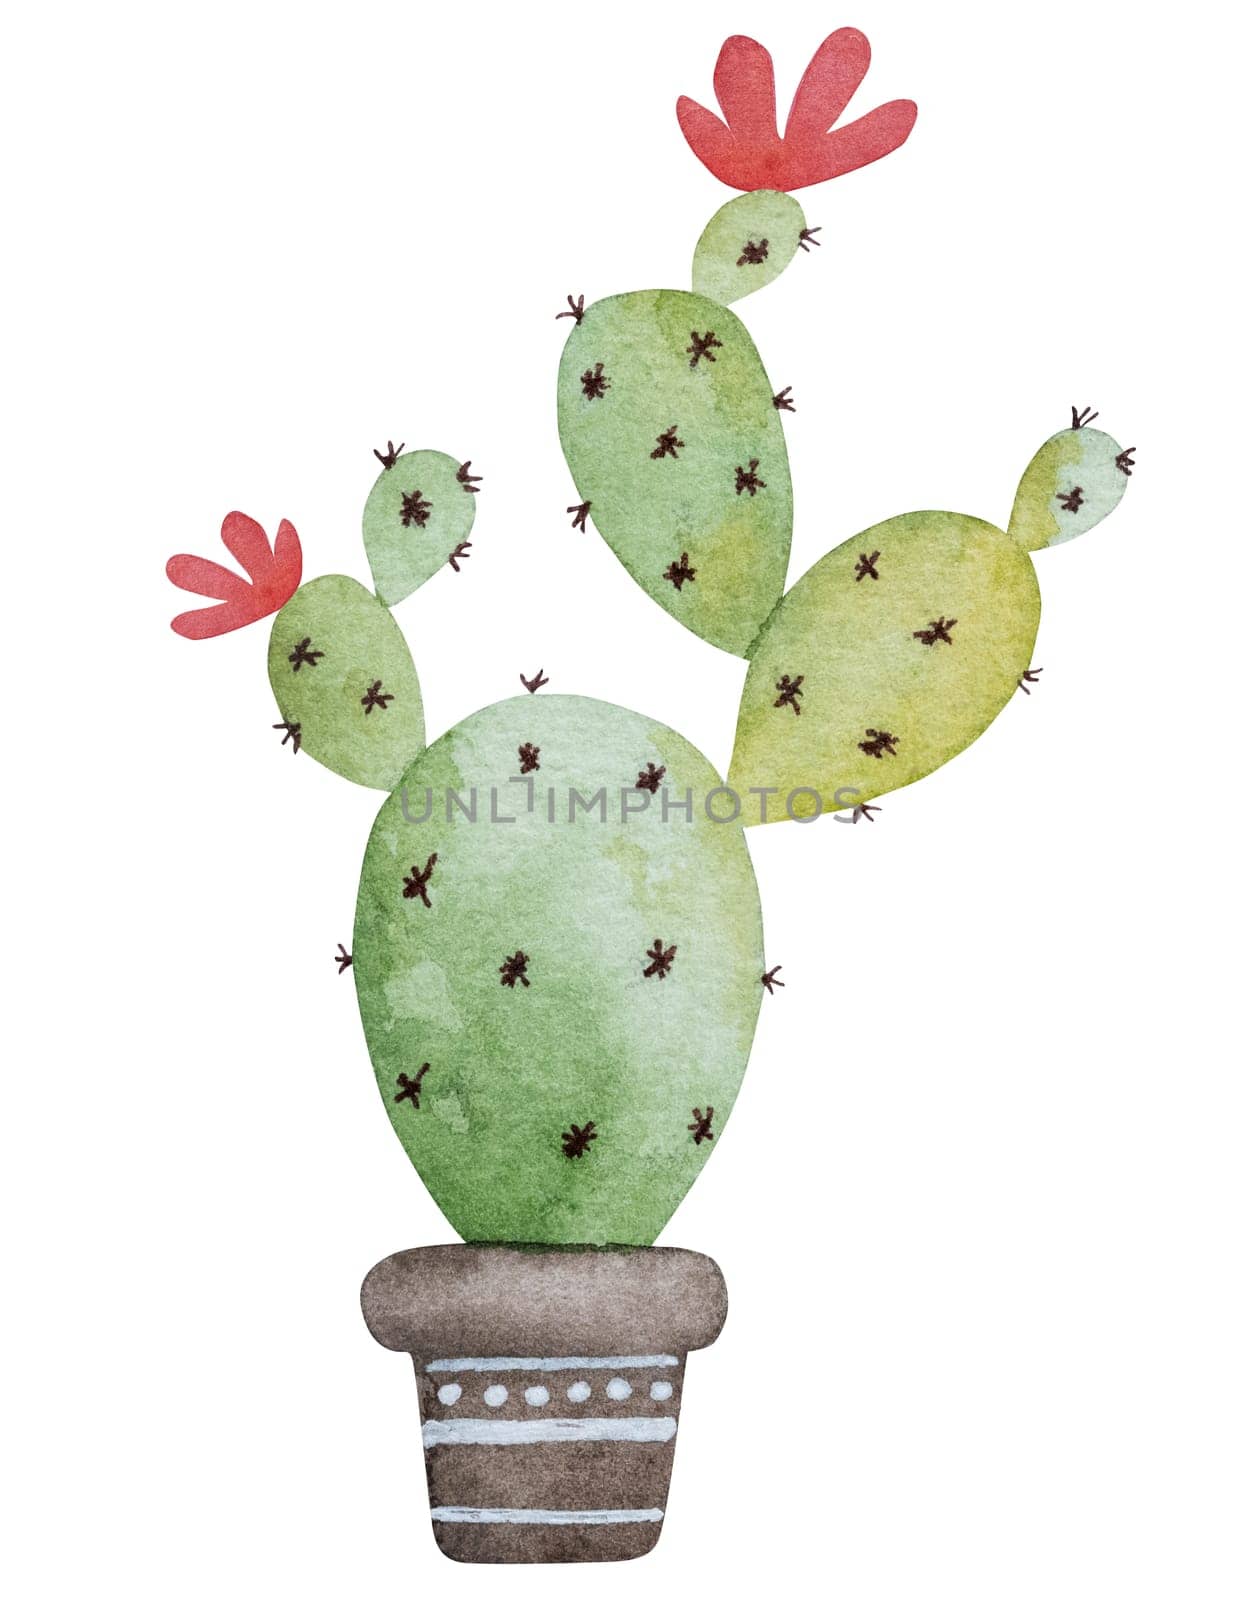 Hand-Painted Watercolor Of Potted Cactus by tan4ikk1